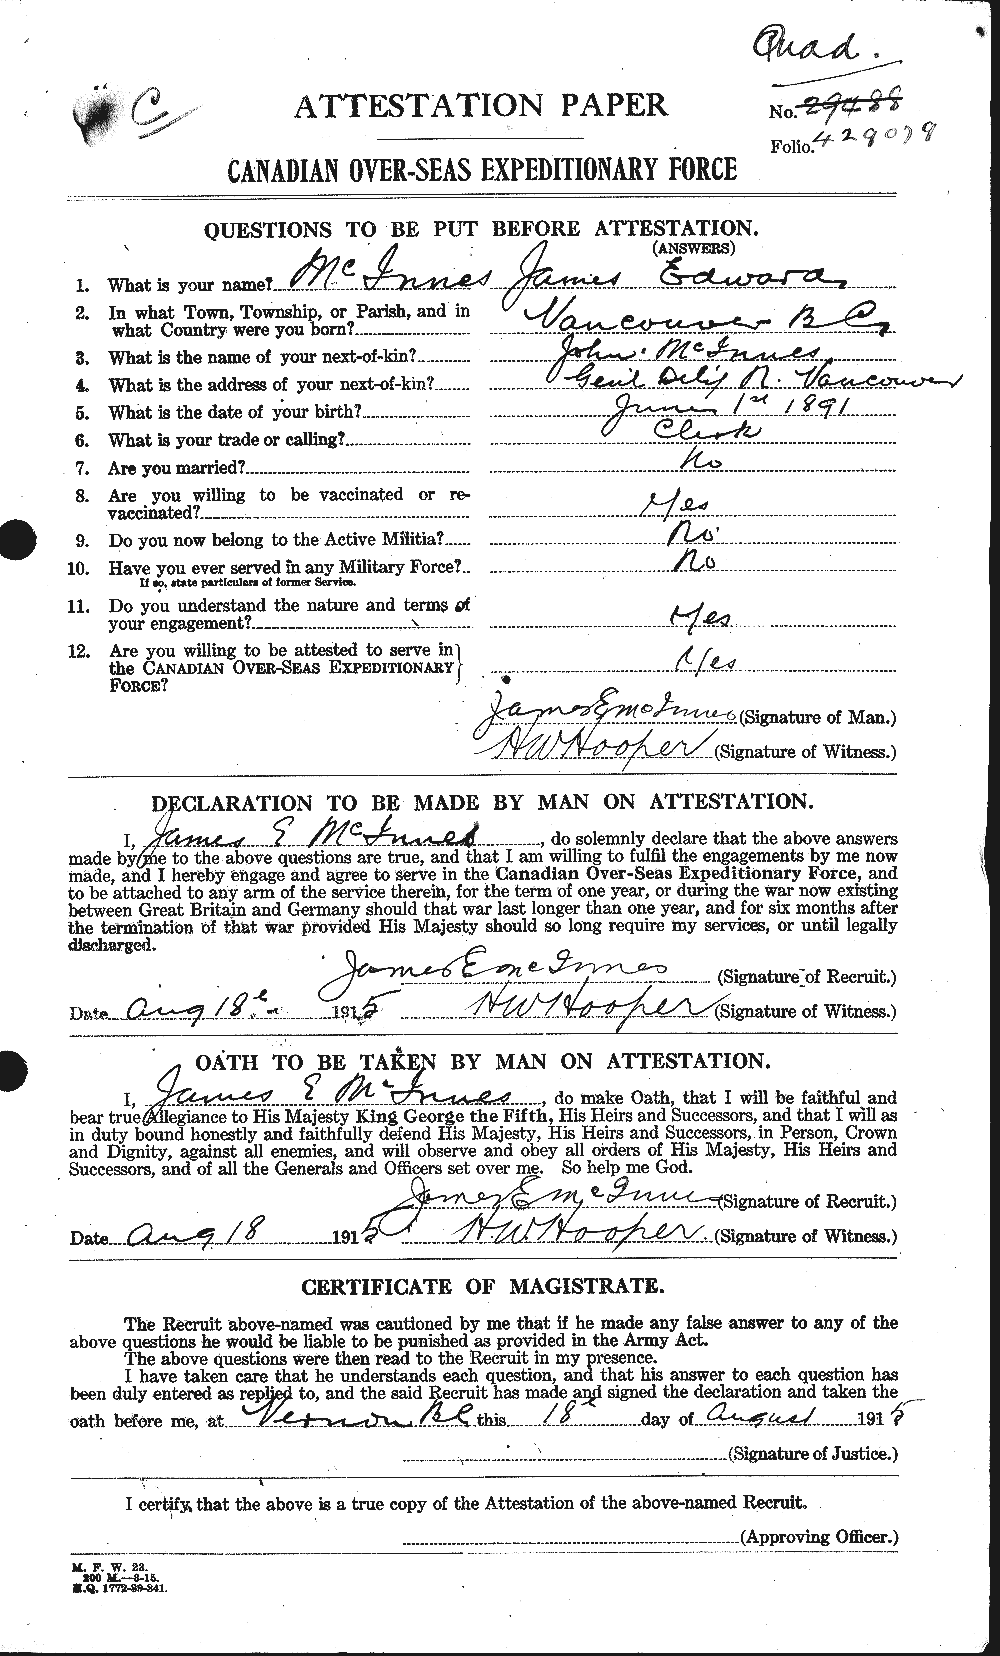 Personnel Records of the First World War - CEF 526676a